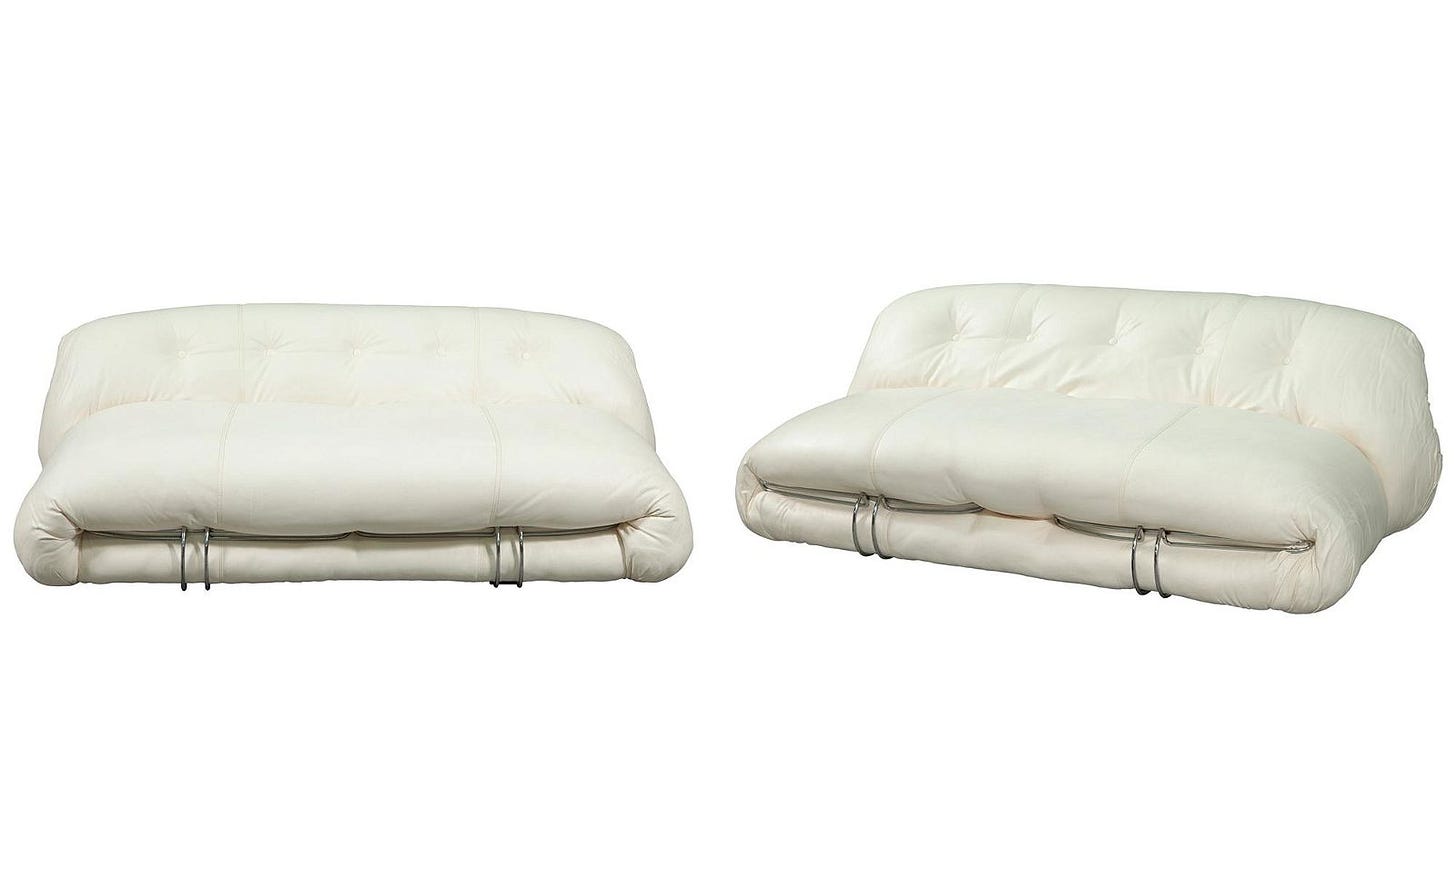 Pair of Afra and Tobia Scarpa Chromed Metal and Faux Leather Soriana Sofas